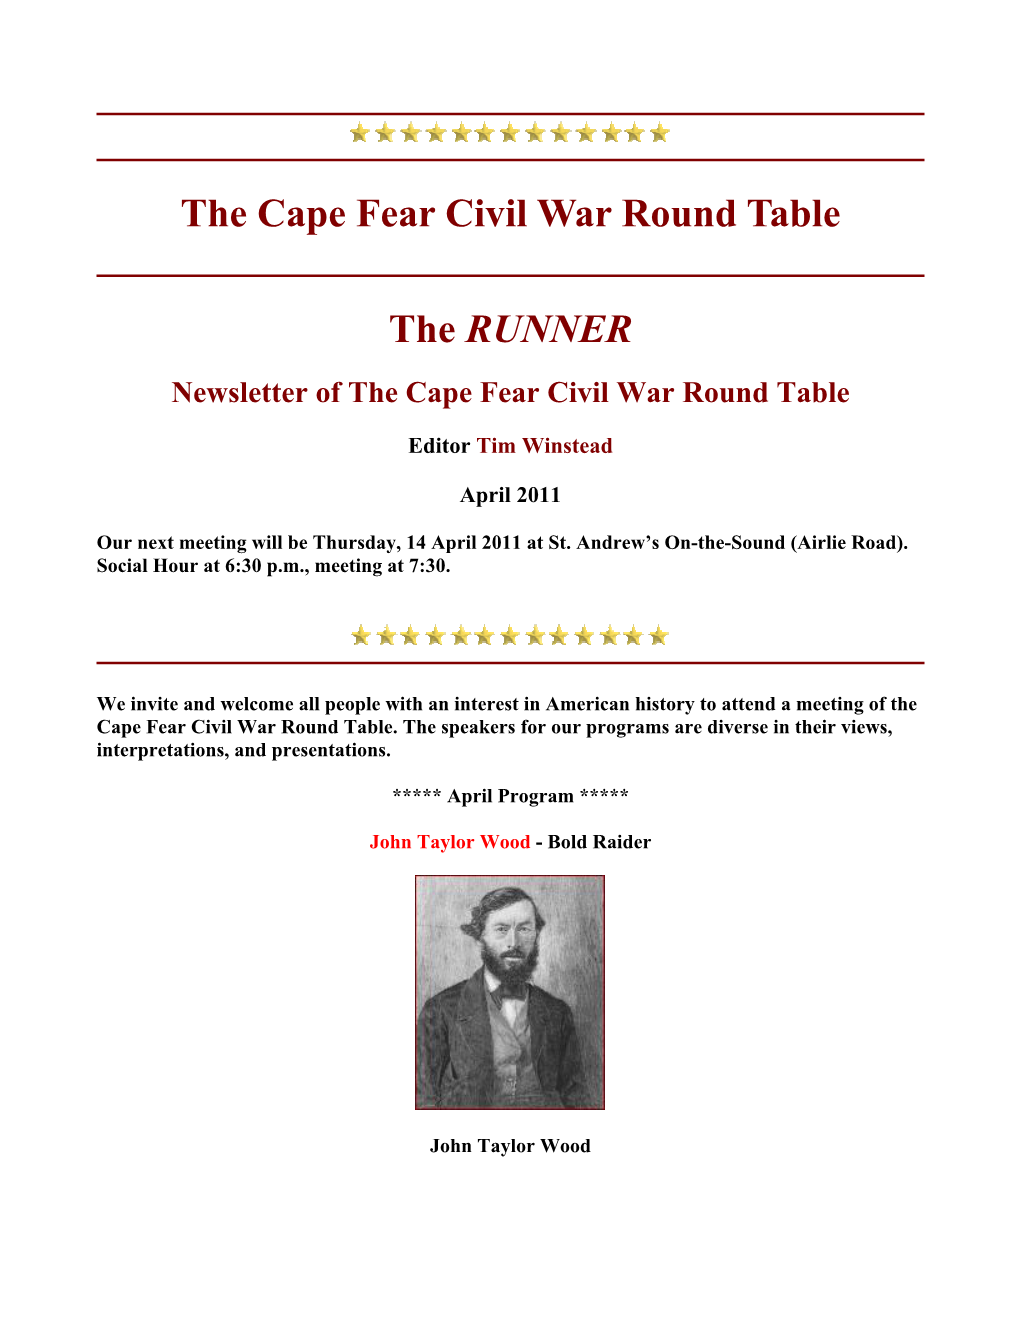 The Cape Fear Civil War Round Table the RUNNER